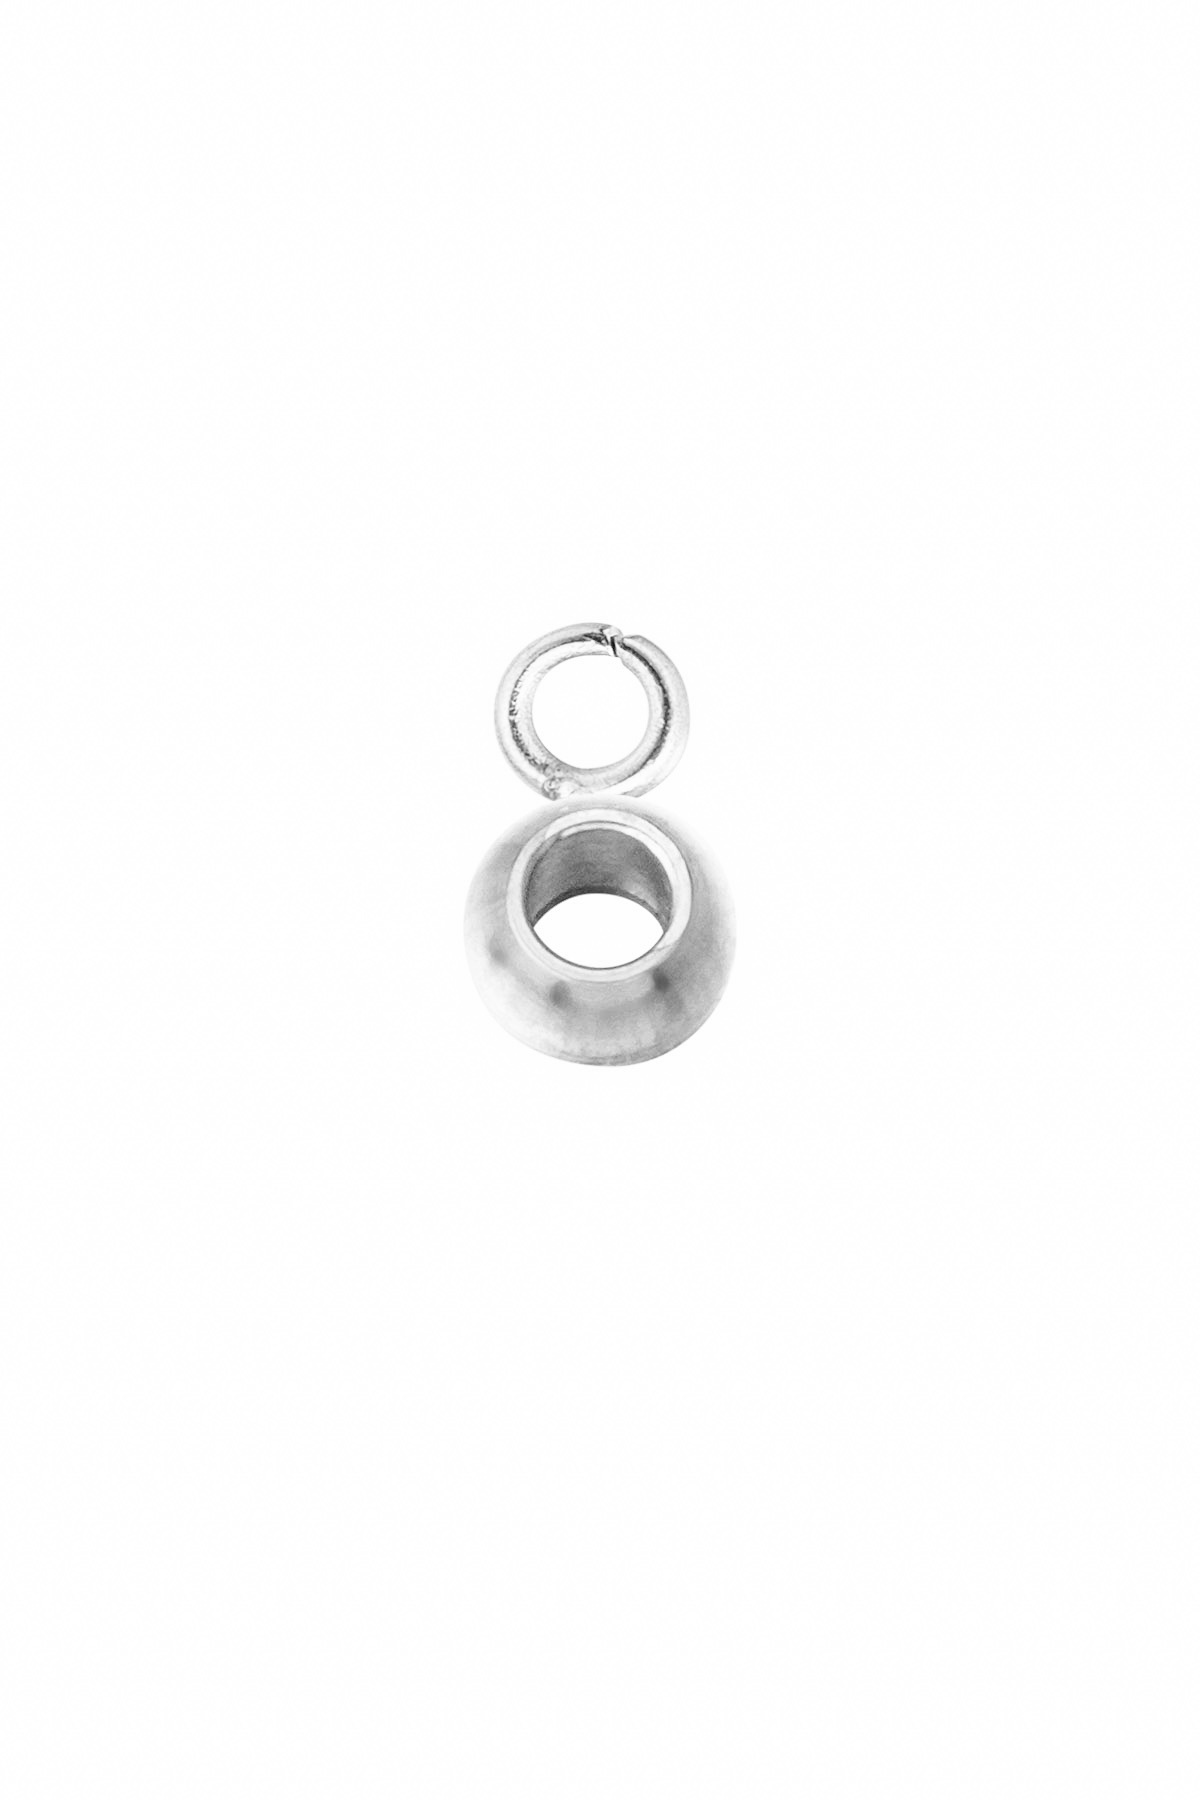 Jewelery part for charms - silver h5 